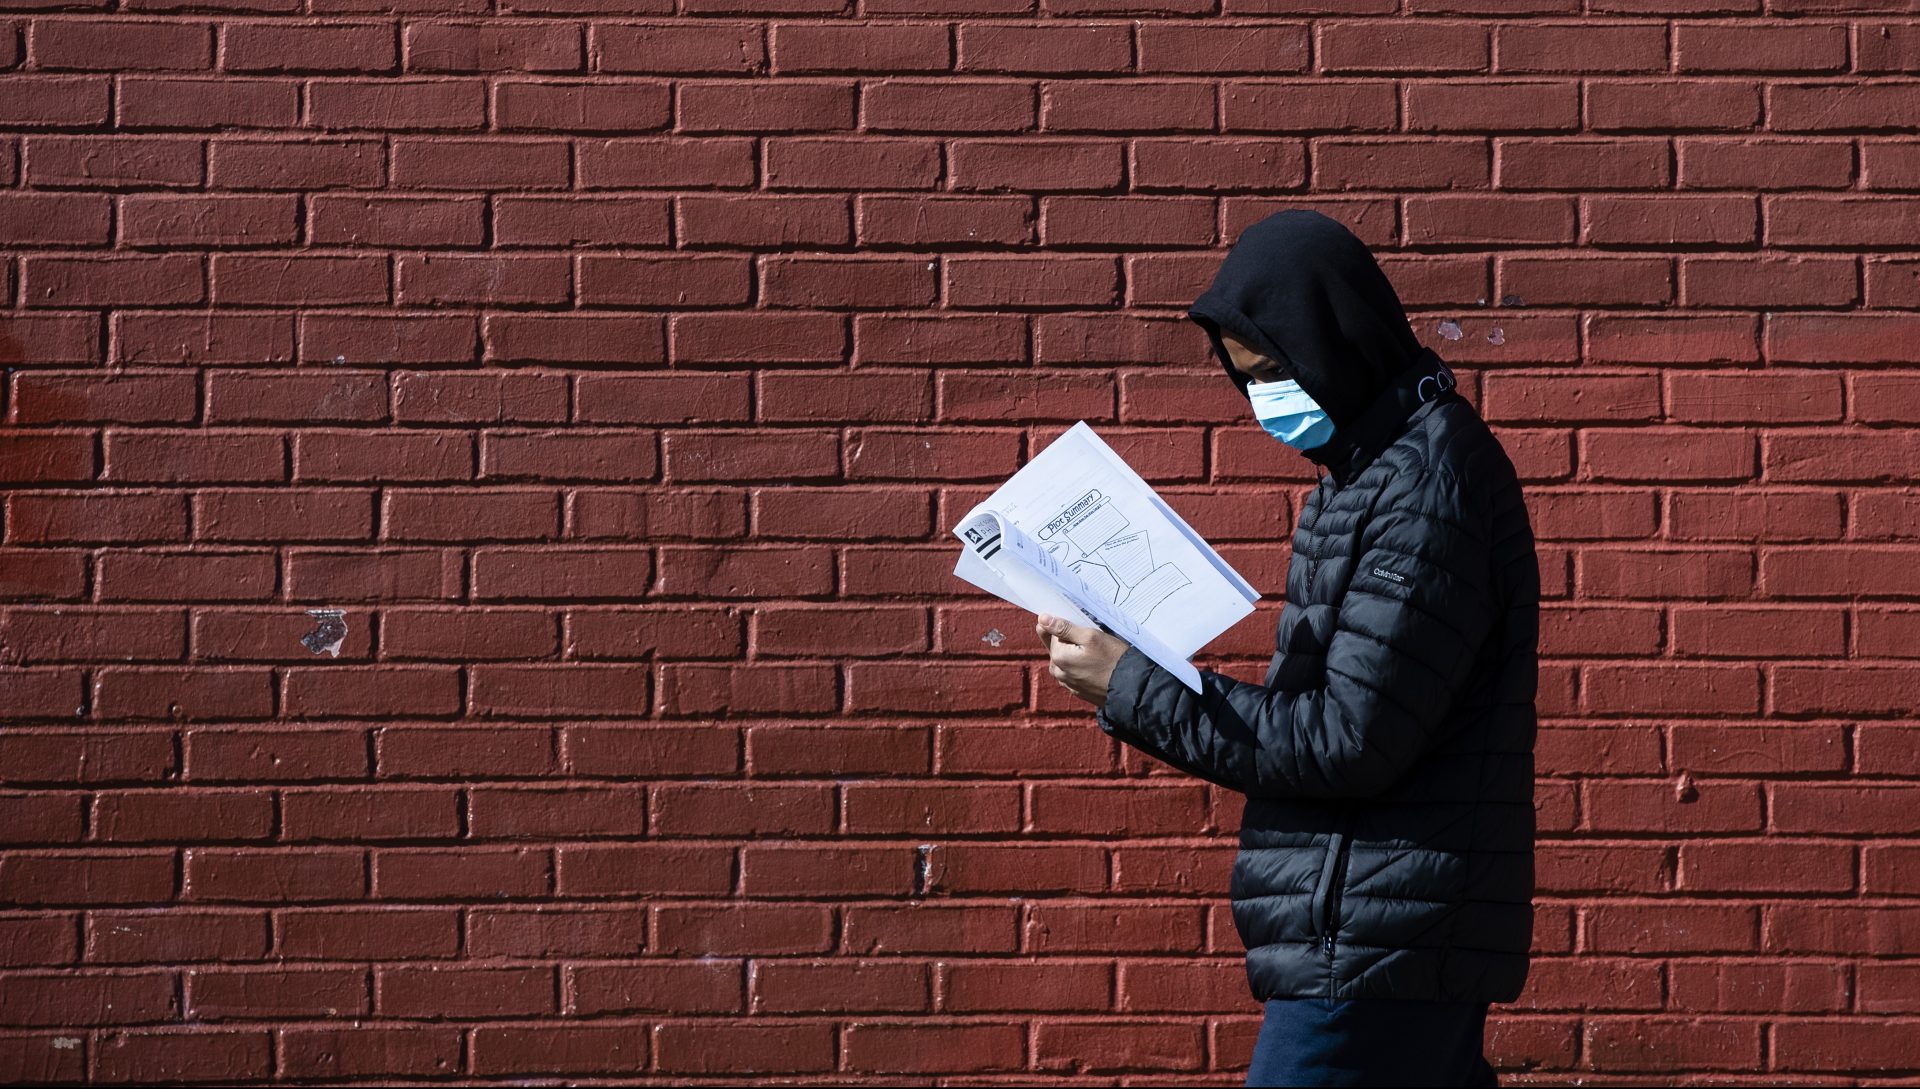 Terrell Bell, wearing a protective face mask, looks at a learning guide he picked up for his little sister at John H. Webster Elementary School in Philadelphia, Thursday, March 26, 2020. Gov. Tom Wolfâ€™s administration reported more new coronavirus-related deaths in Pennsylvania on Wednesday. Residents are ordered to stay home, with few exceptions.